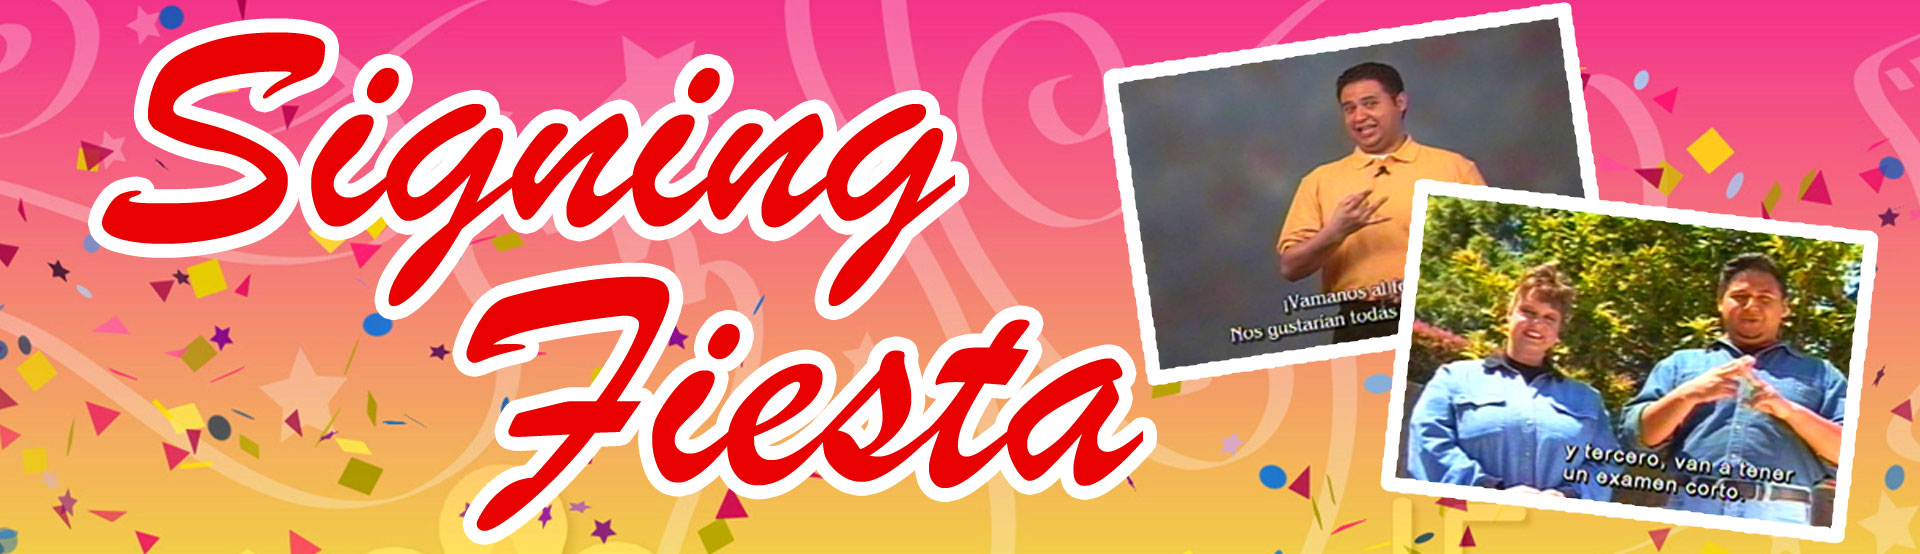 The image's background is hot pink and orange with multicolored confetti entitled (red font outlined in white) "Signing Fiesta". There are two photos of people signing.